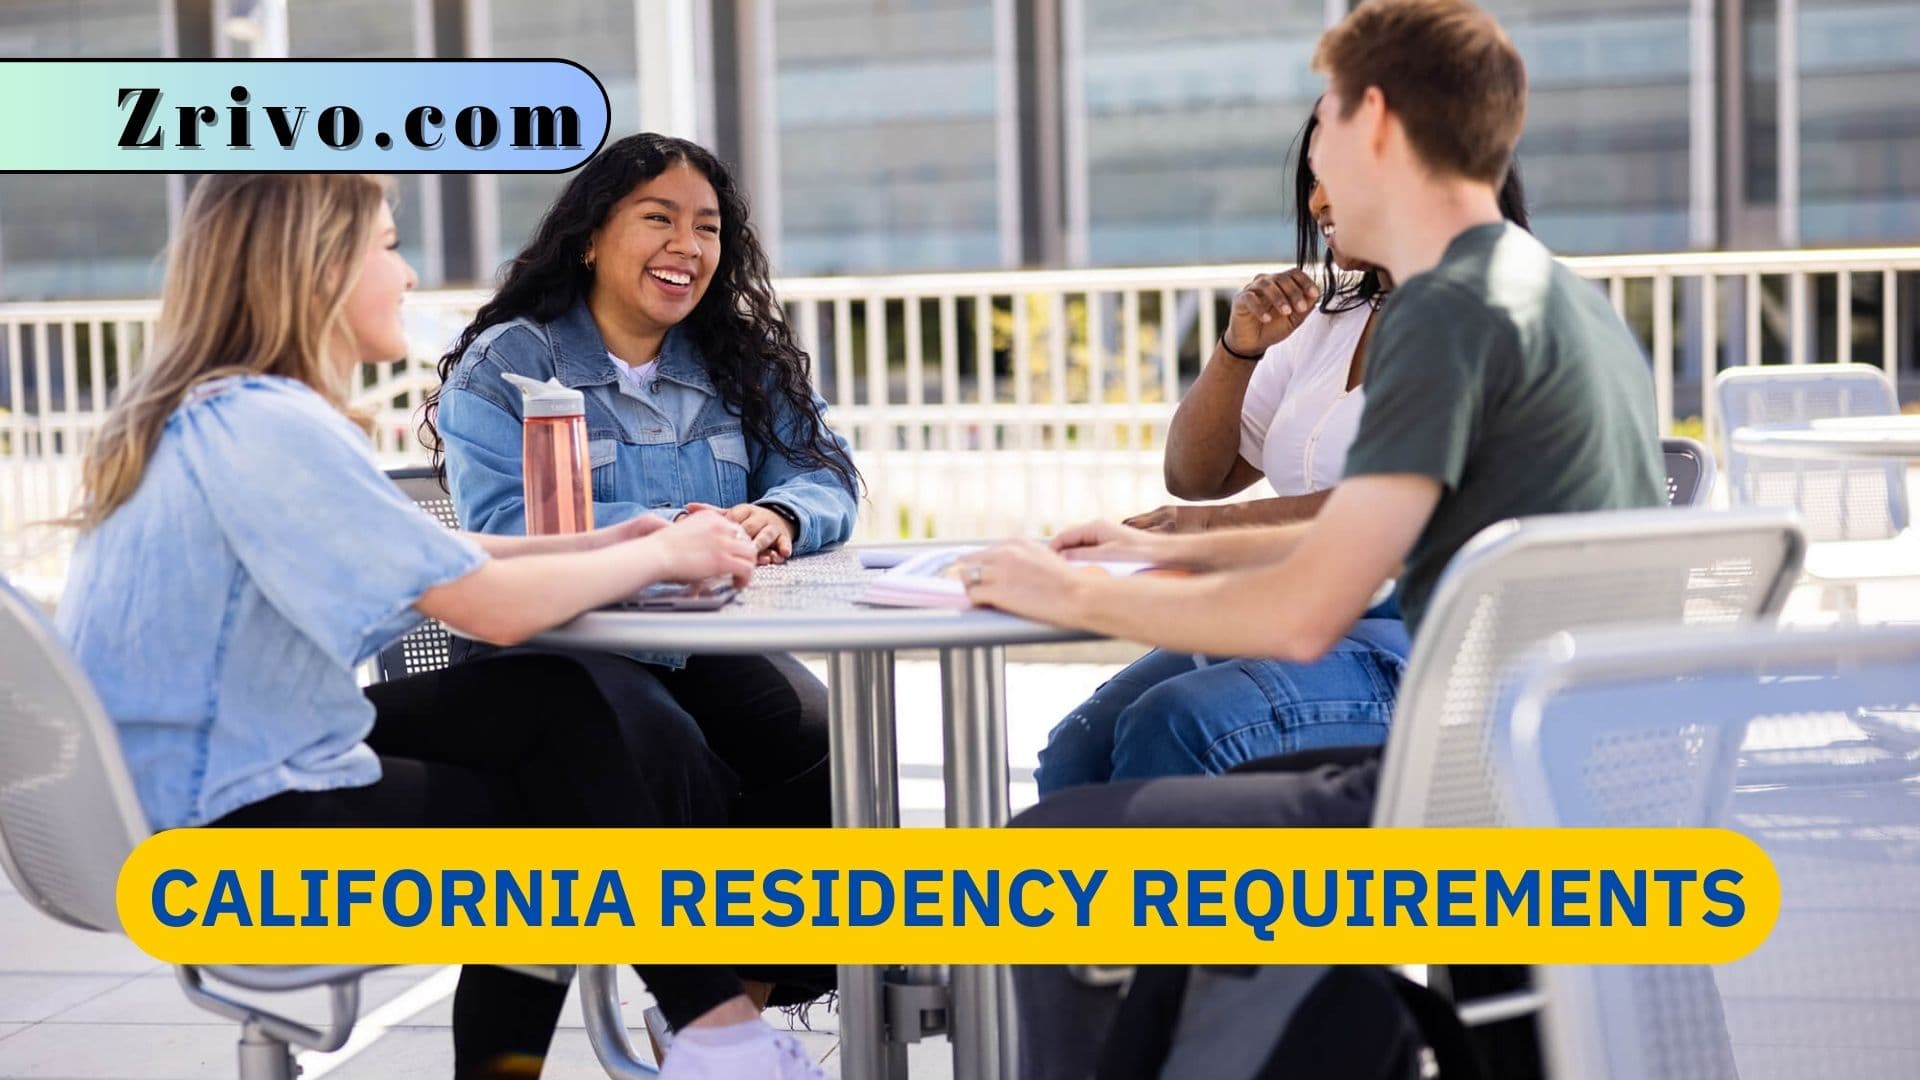 California Residency Requirements